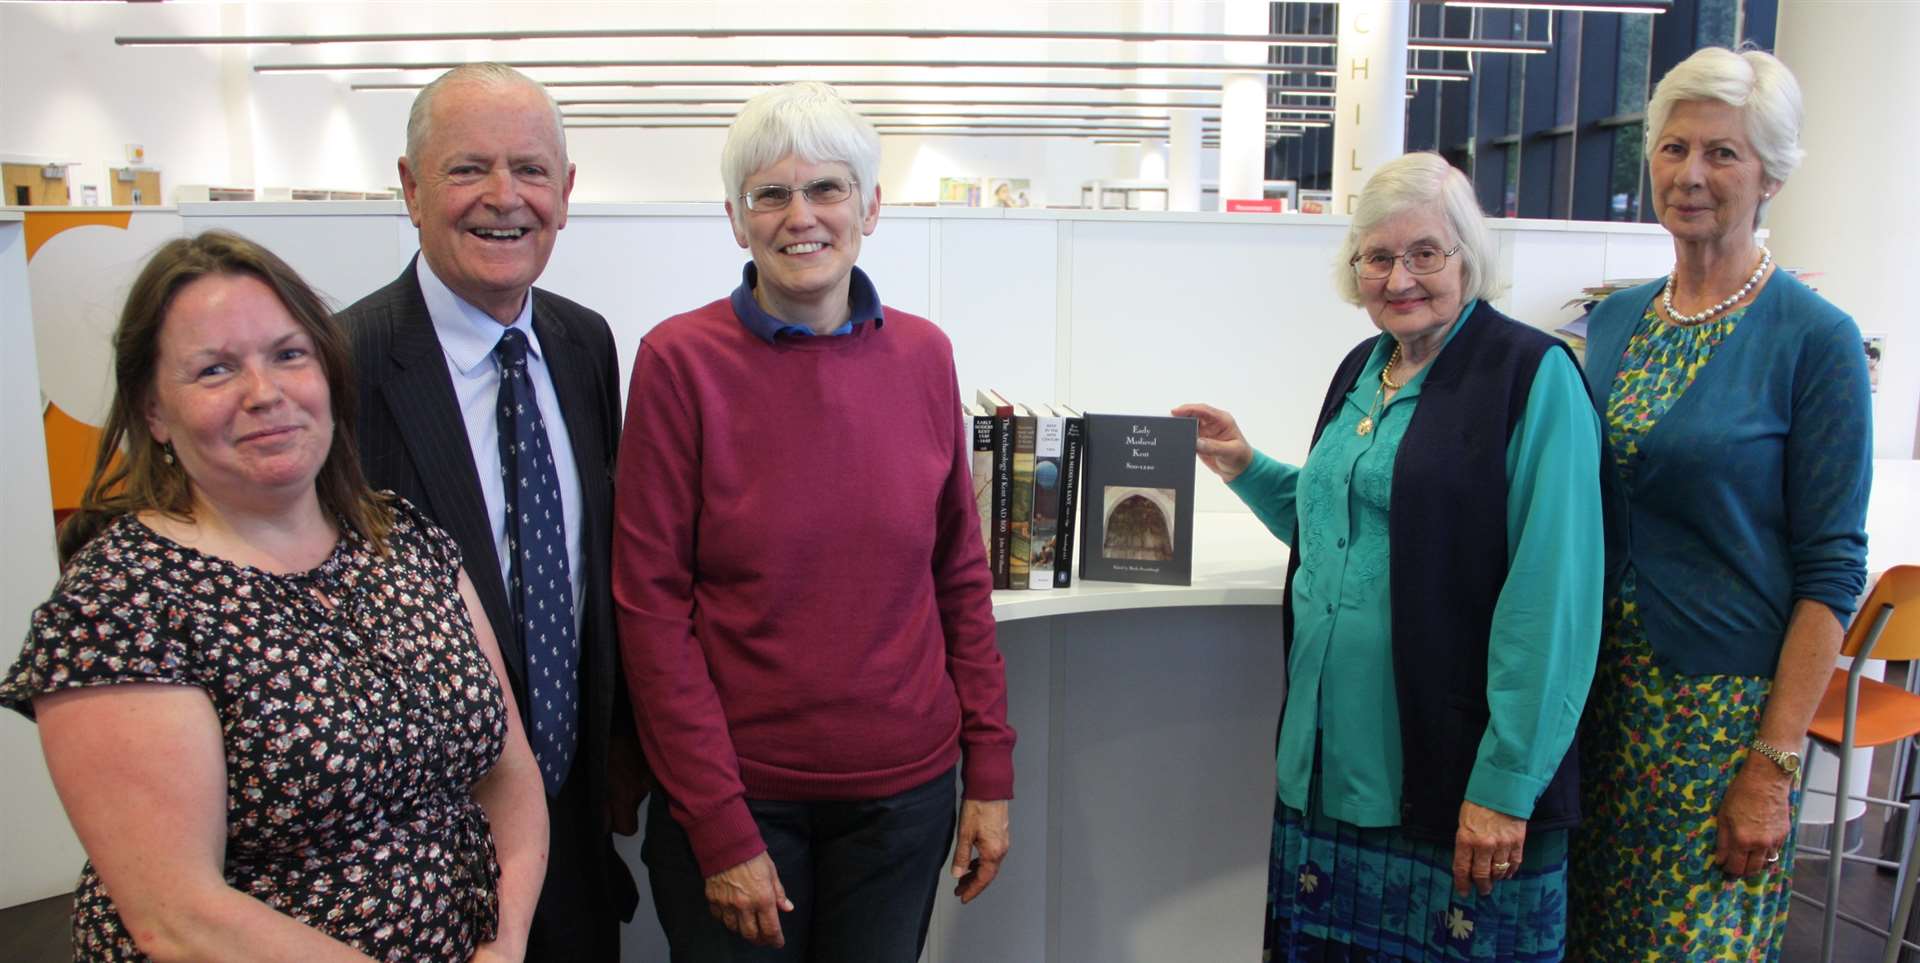 Dr Felicity Simpson adds the tenth and final volume to the project watched by, from left, Sarah Stanley, Mike Hill, Dr Sheila Sweetinburgh and Mrs Sarah Hohler.